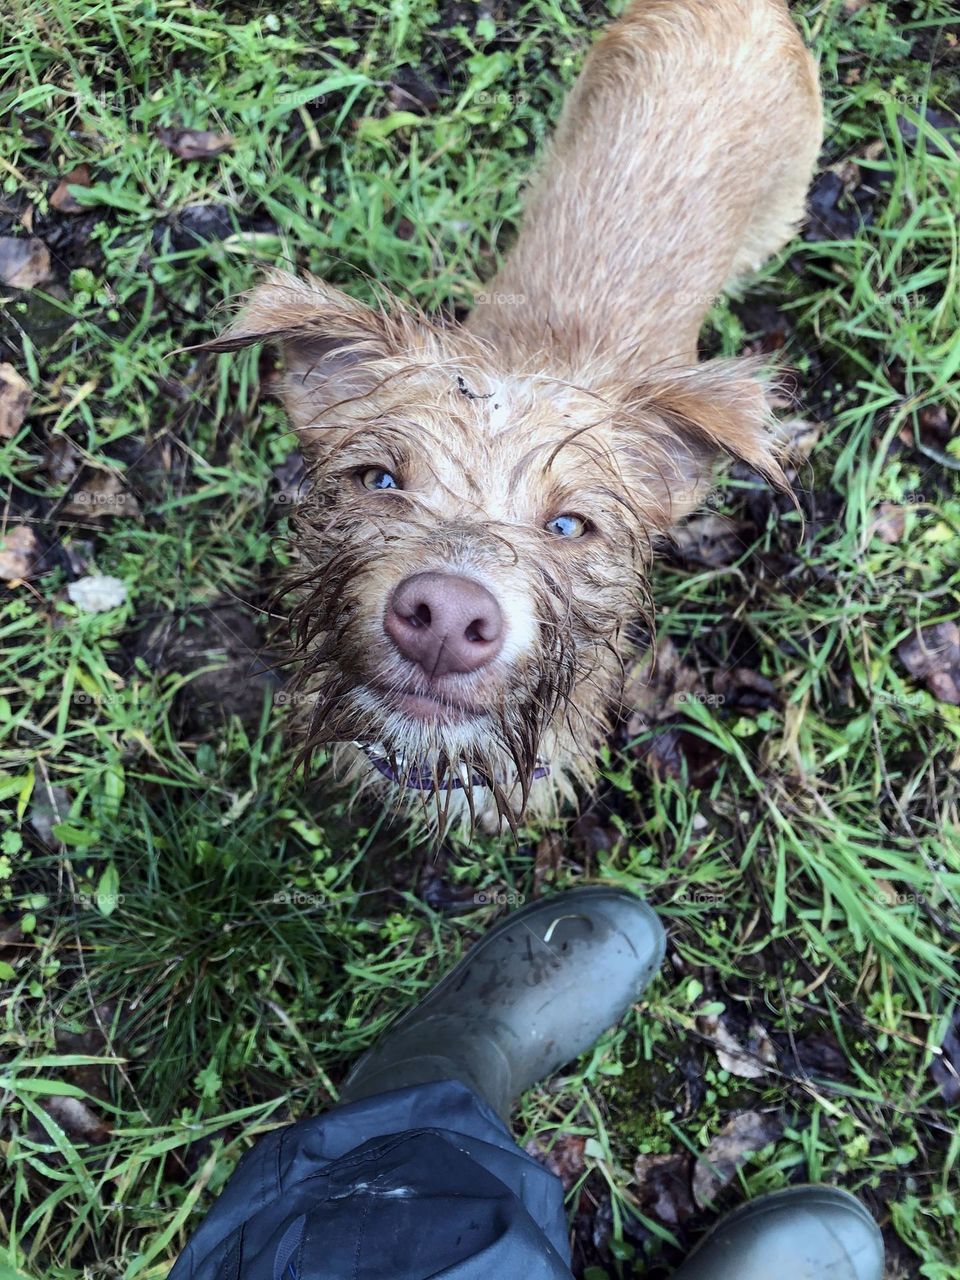 Muddy walks - a very mucky pup looks up at her Wellington boot clad owner